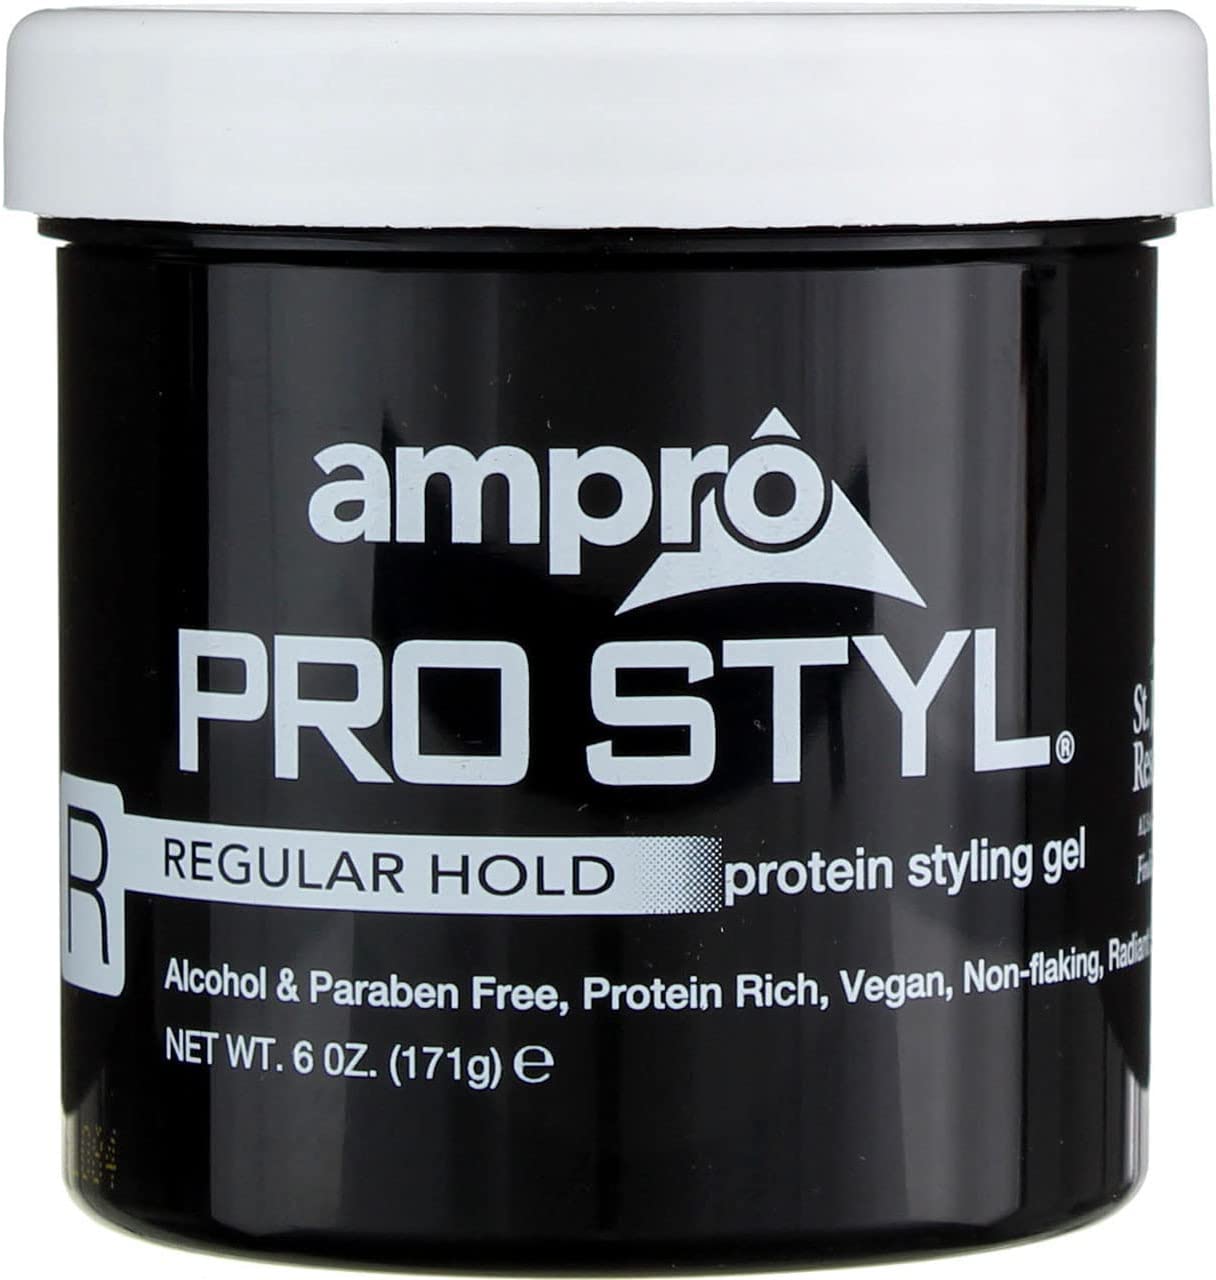 Ampro Pro Style Regular Hold - VIP Extensions